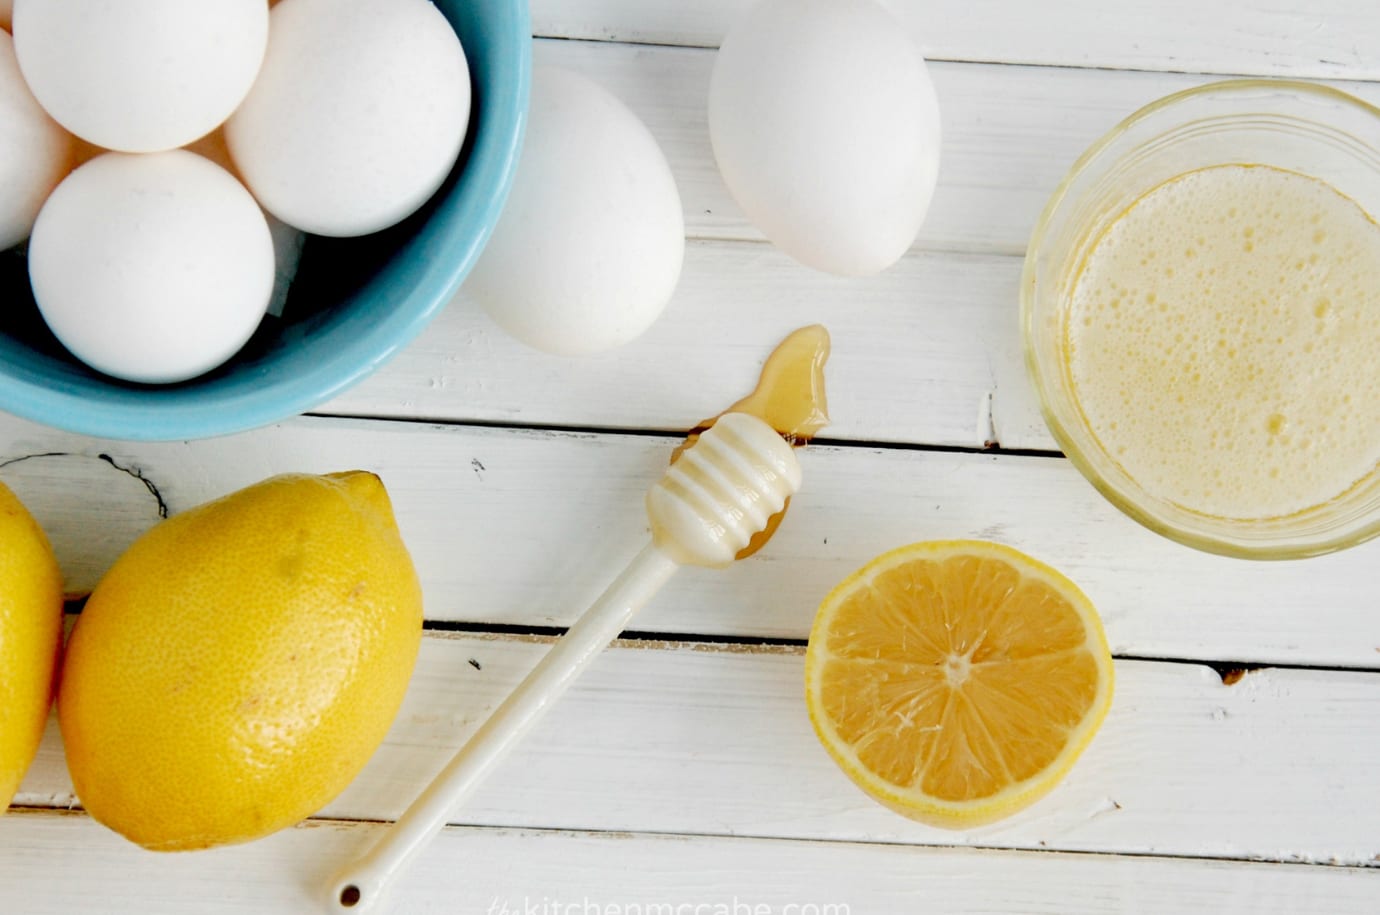 Lemon, eggs and honey on a wooden table top